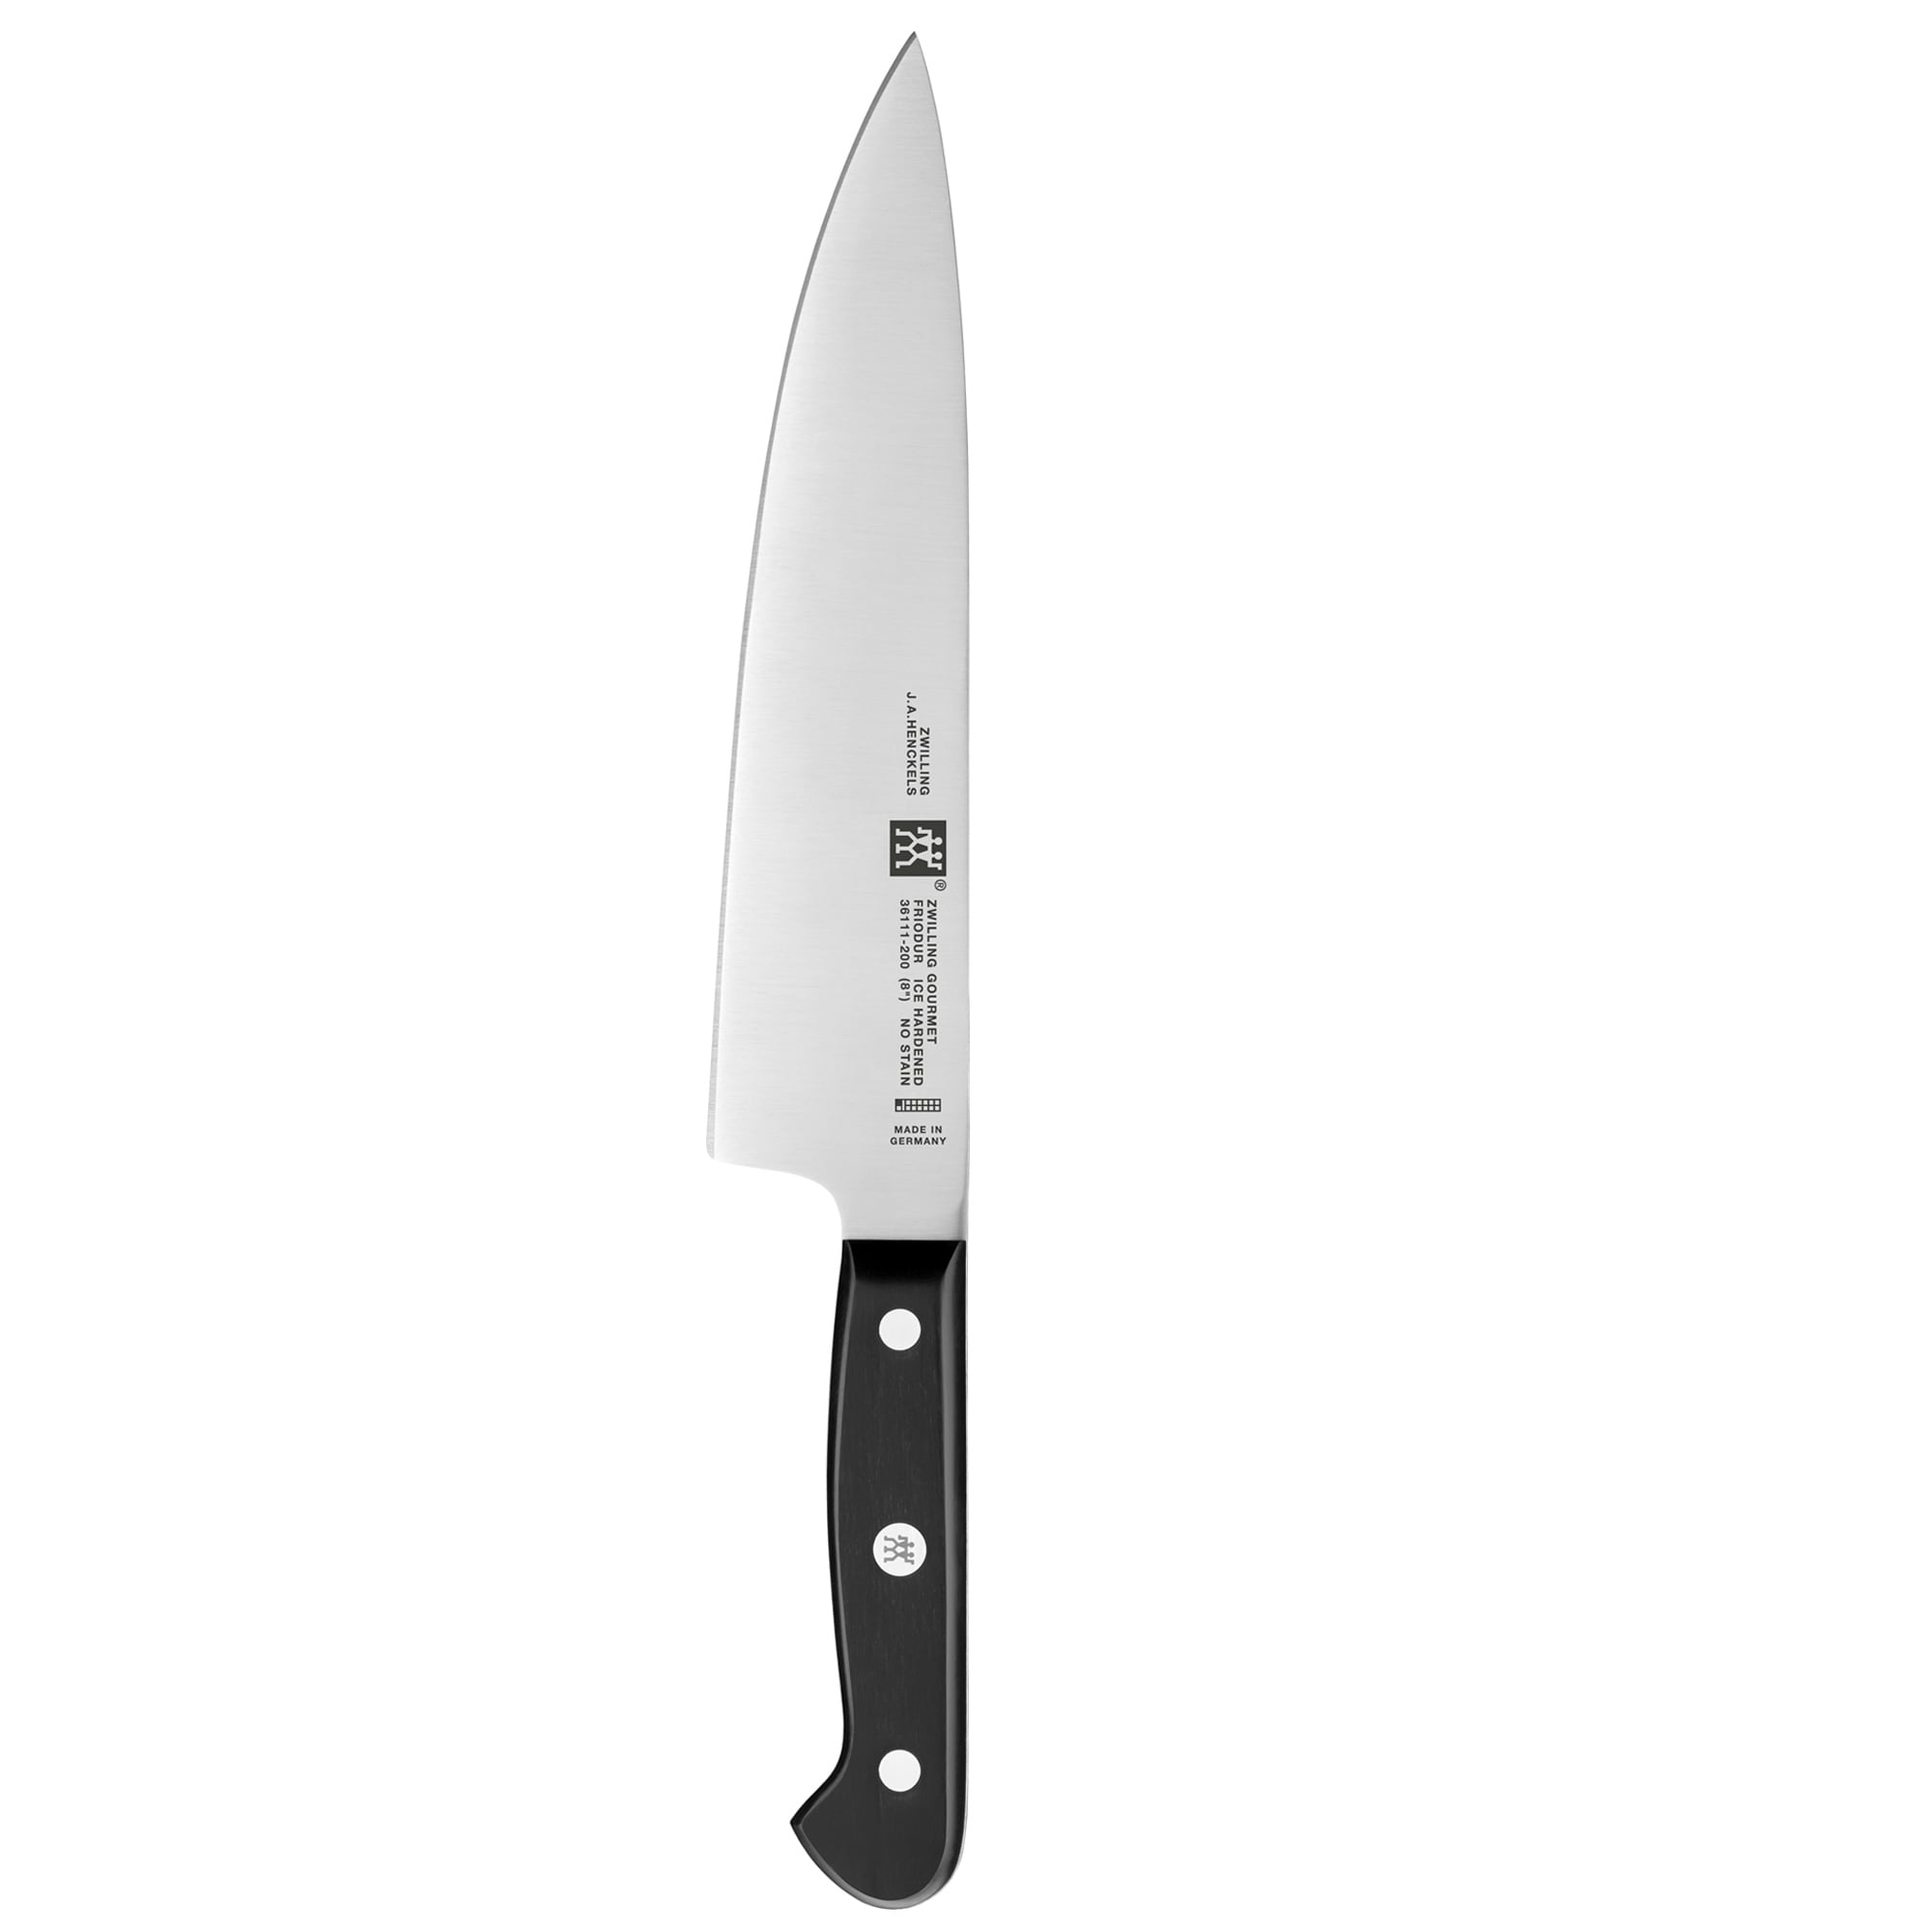 https://ak1.ostkcdn.com/images/products/is/images/direct/1d49bf94118ab979c9c7d39448dc2539937960cc/ZWILLING-Gourmet-8%22-Chef%27s-Knife.jpg